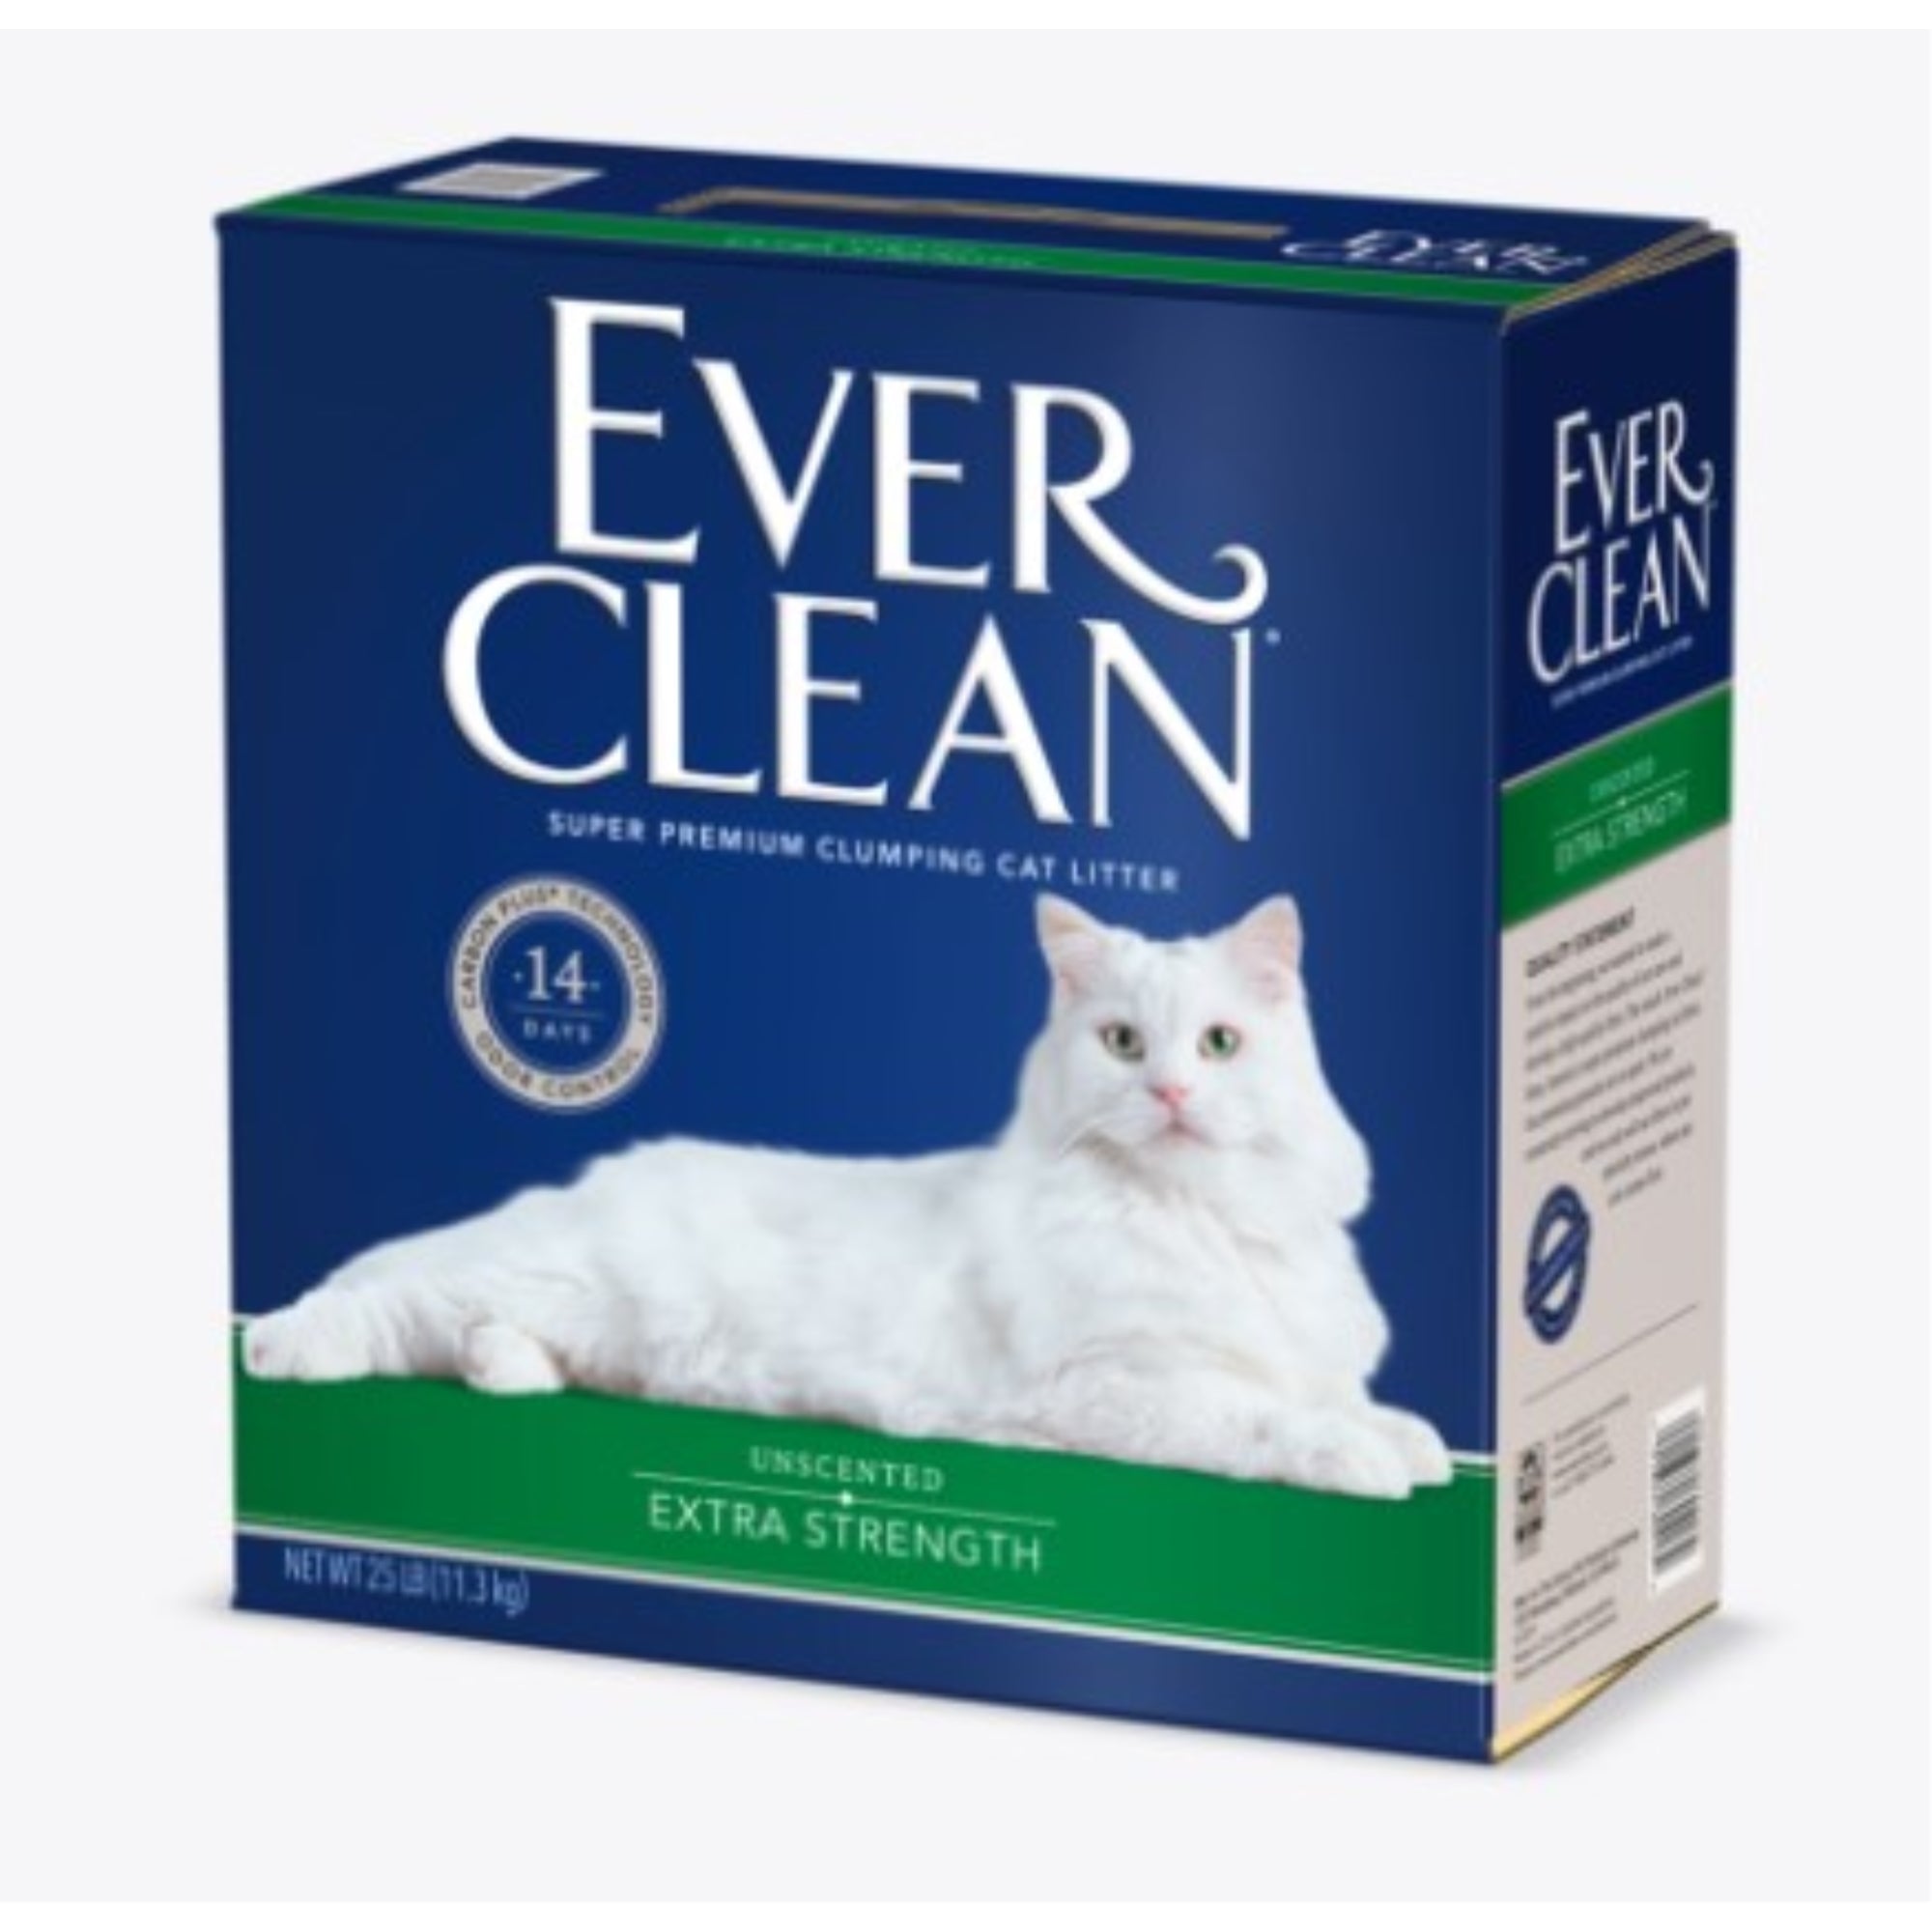 Clorox Petcare Ever Clean Extra Strength Clumping Cat Litter, 25 lbs